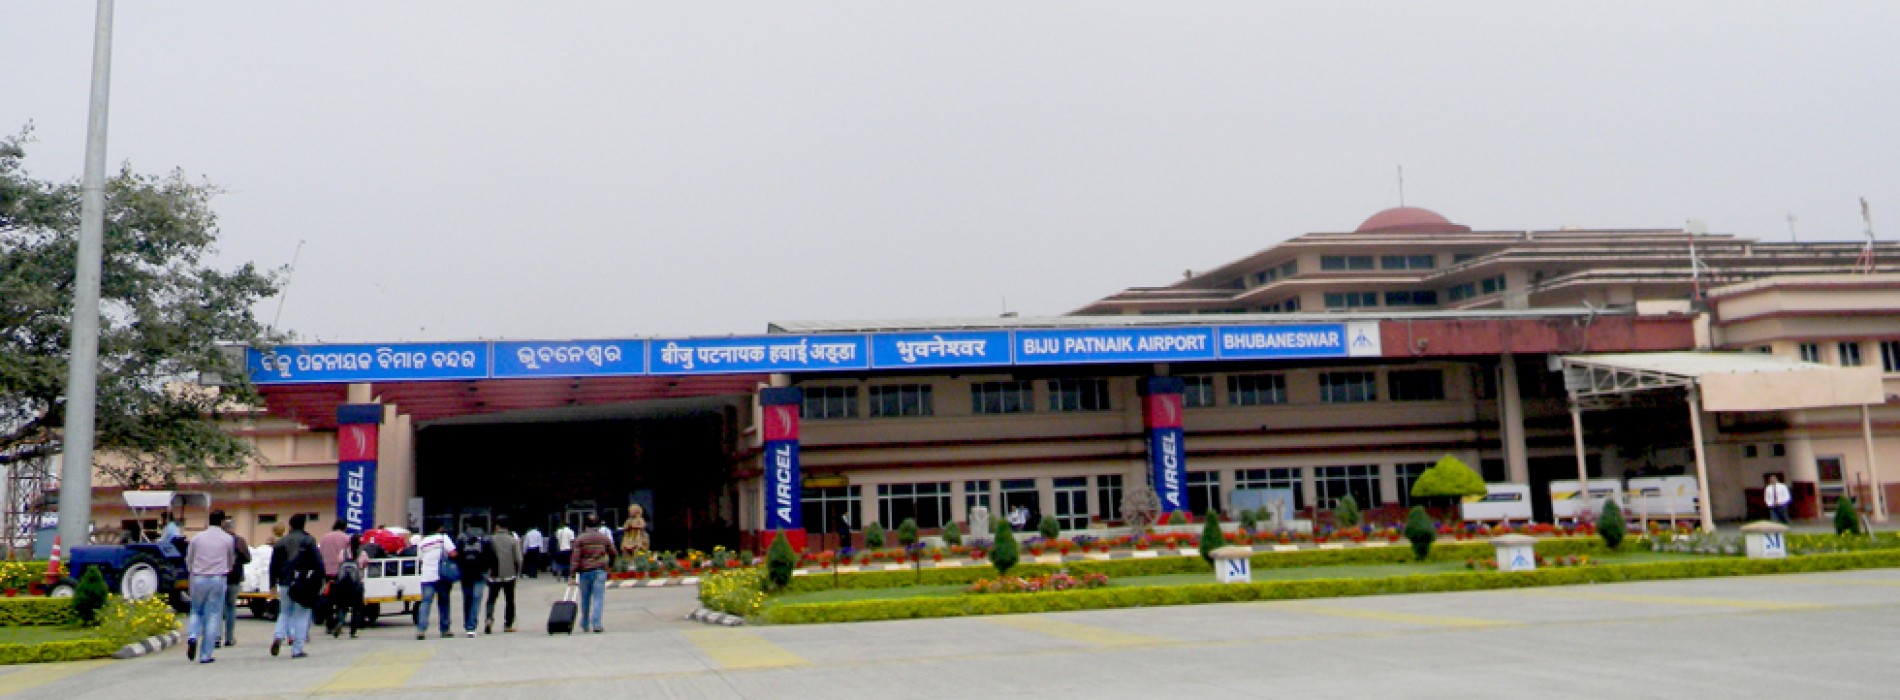 Airport Authority of India to introduce new international airport in Odisha